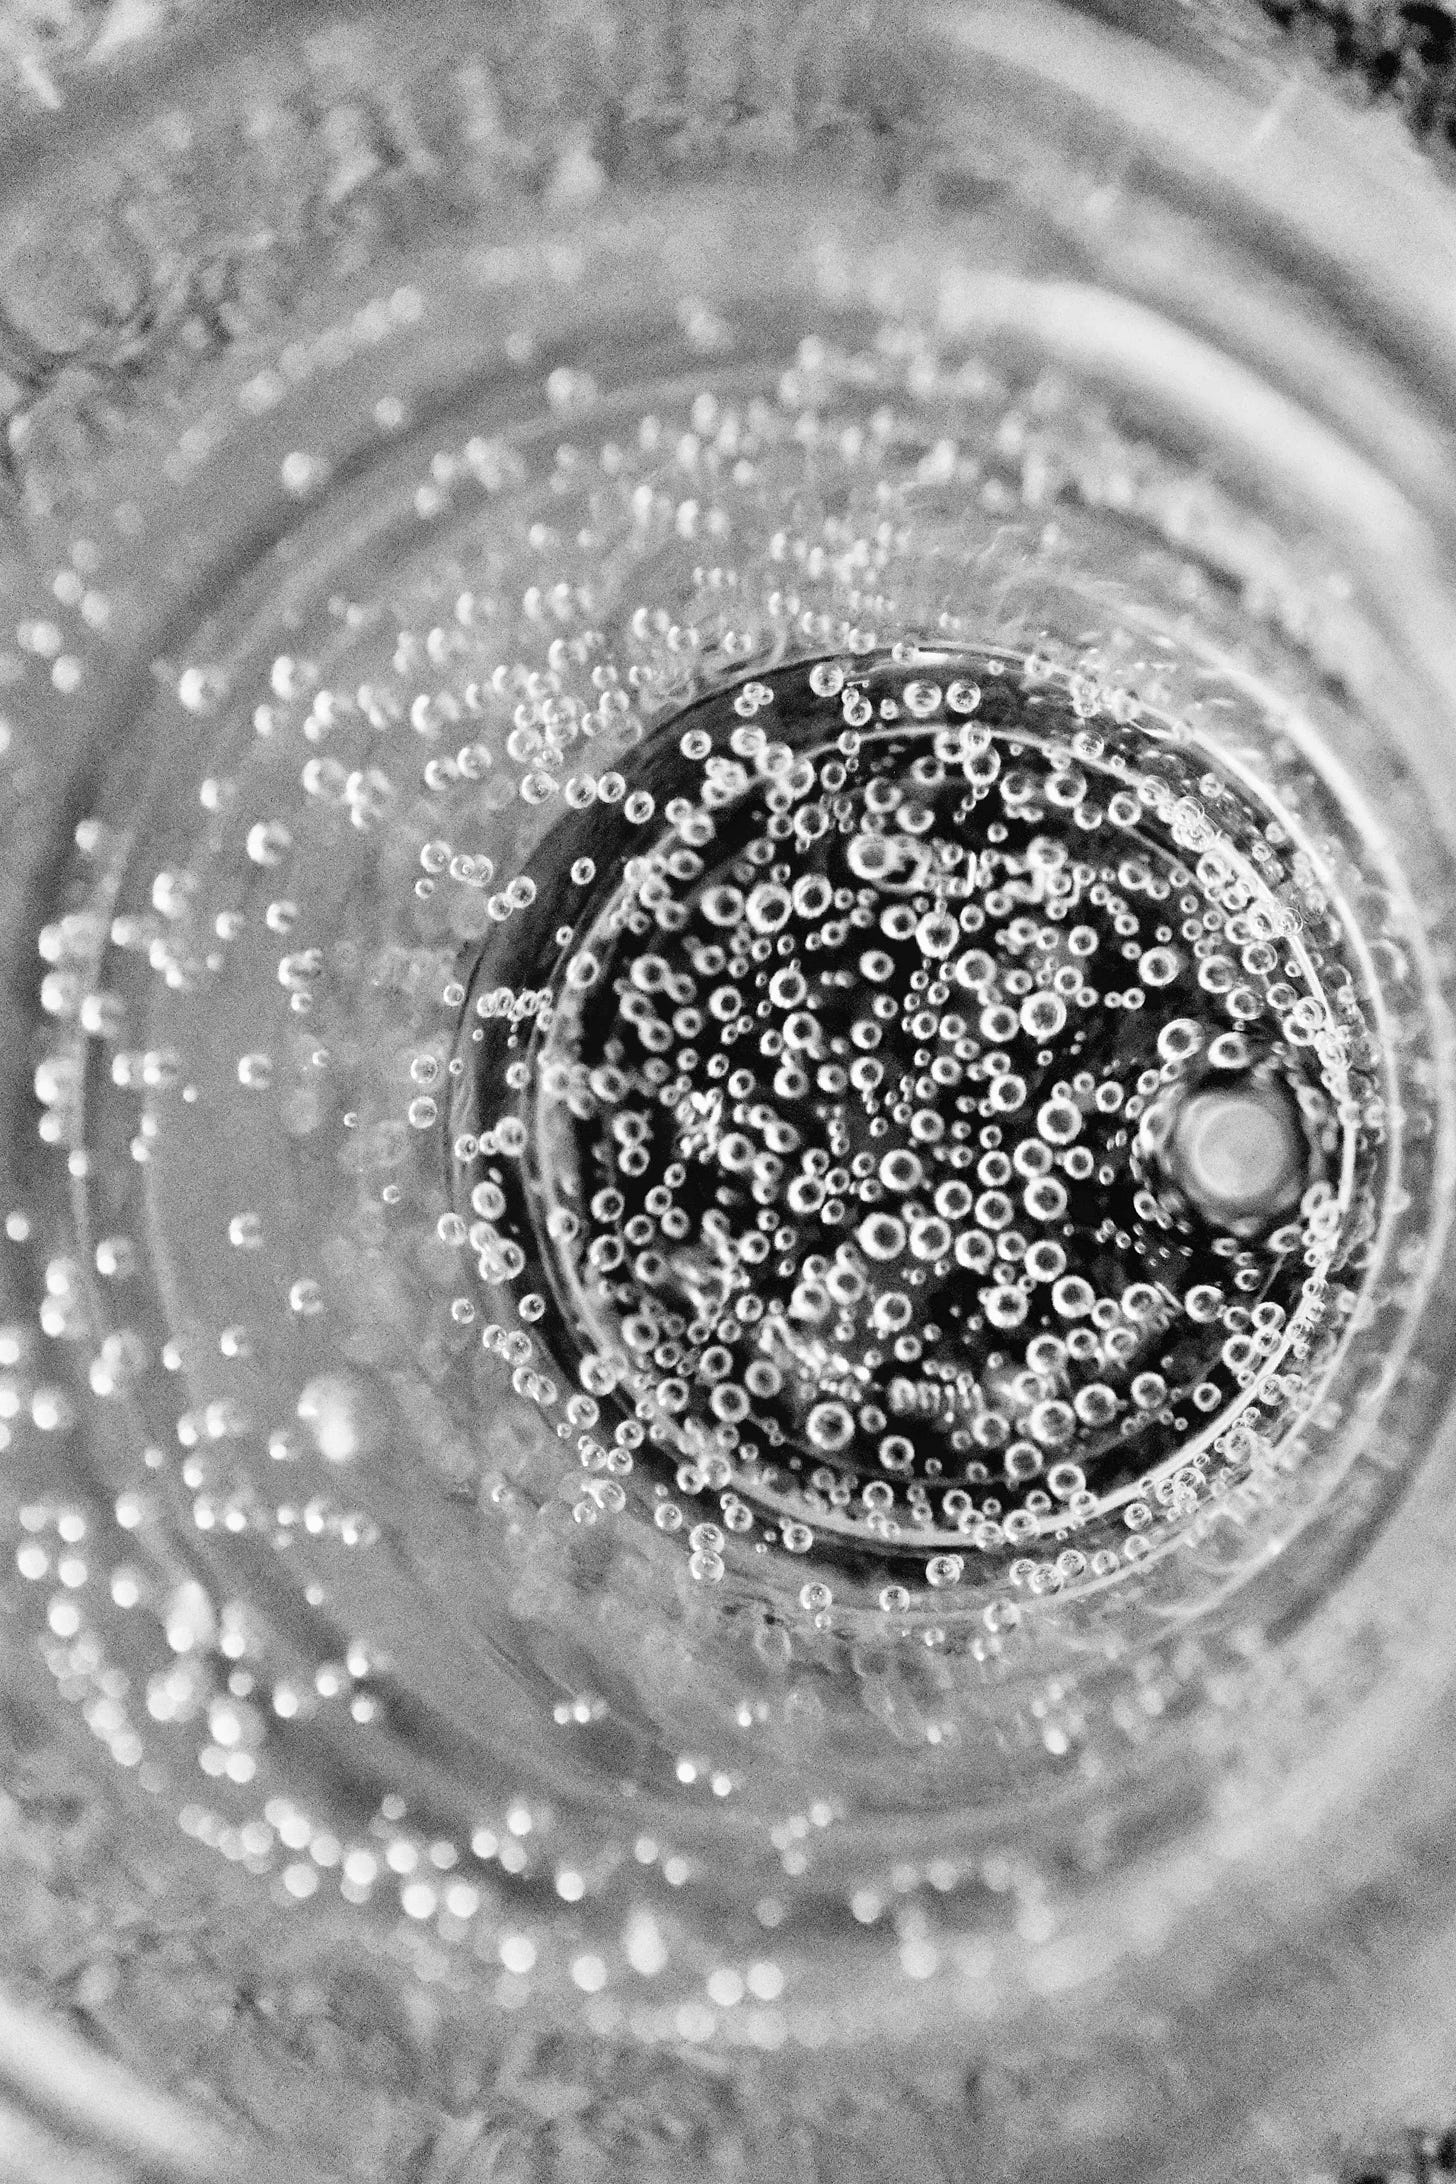 A black and white photo of a swirly abstract surface with lots of little bubbles covering a black hole in the middle.